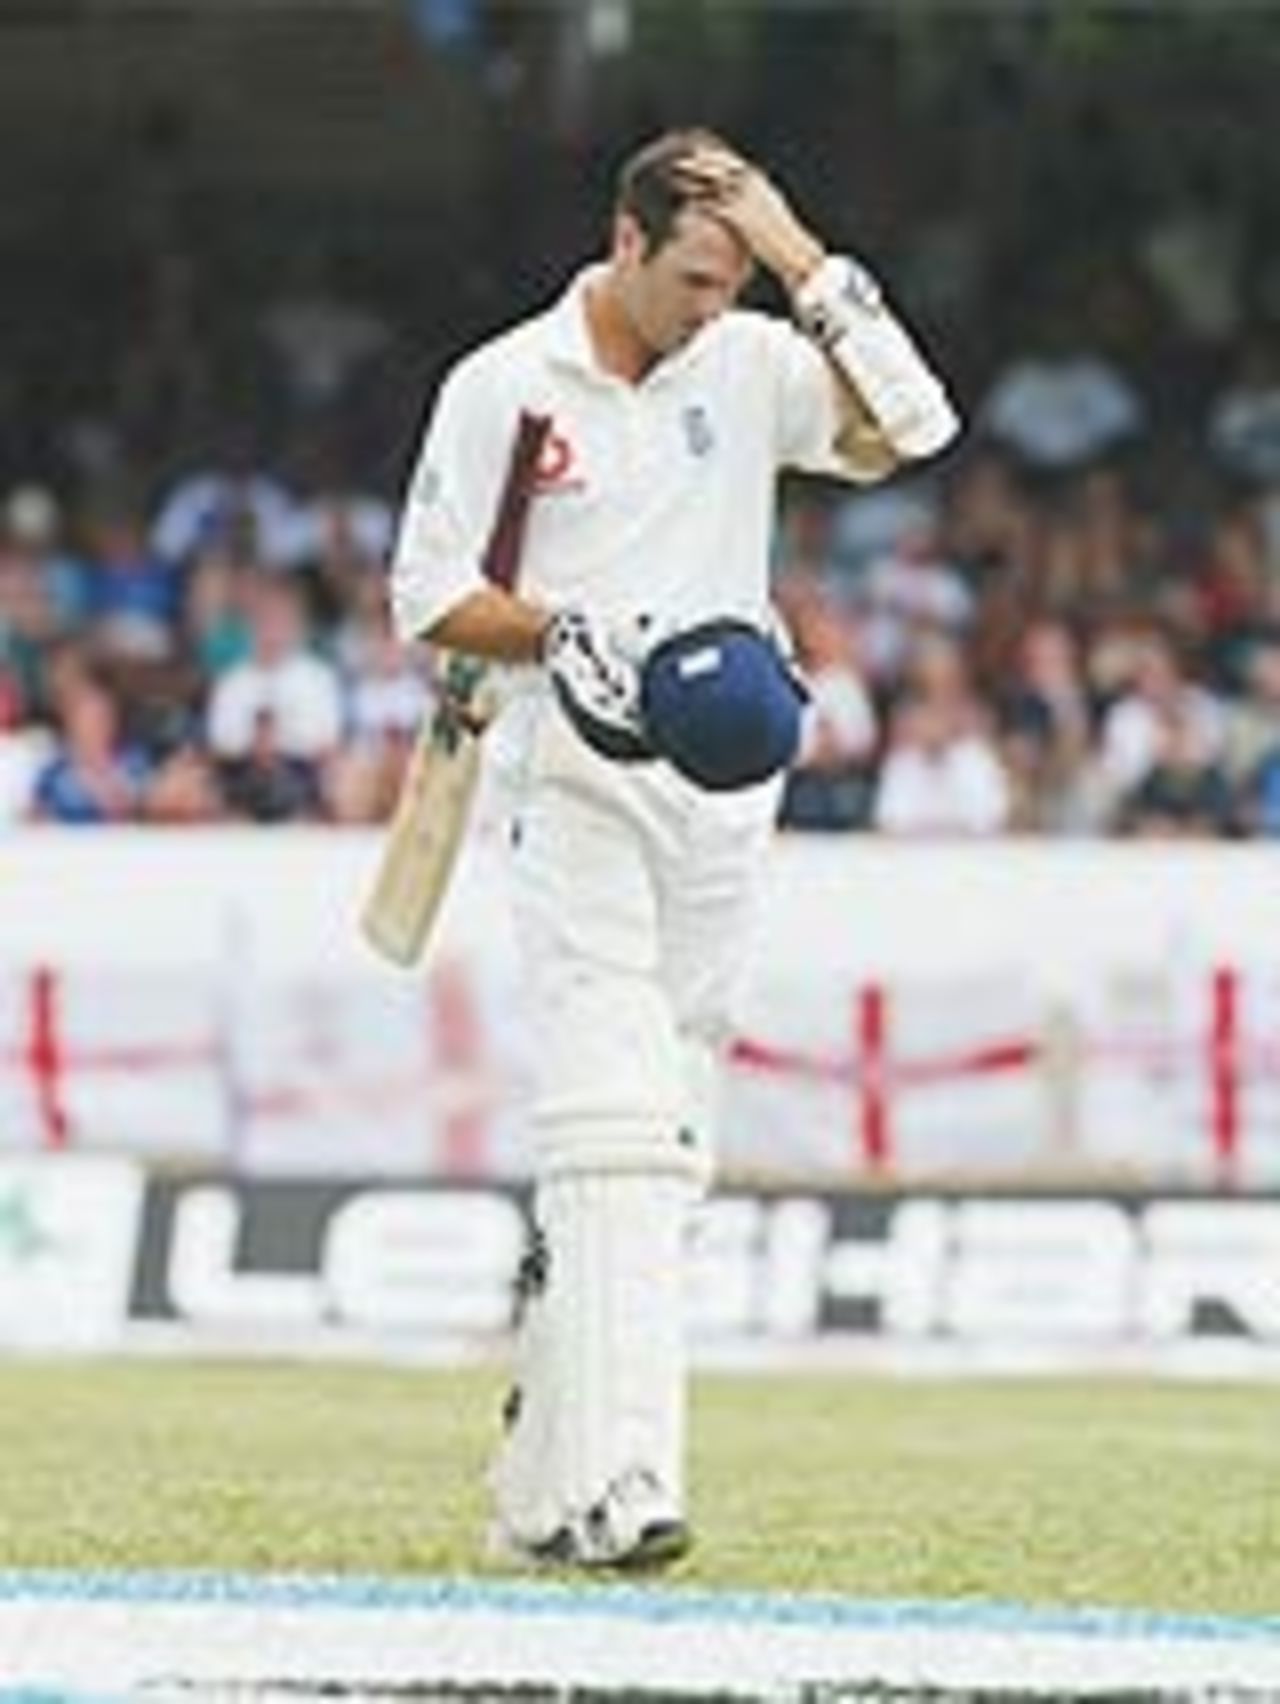 Michael Vaughan walks off after being dismissed, West Indies v England, 2nd test, Trinidad, 2nd day, 20th March, 2004